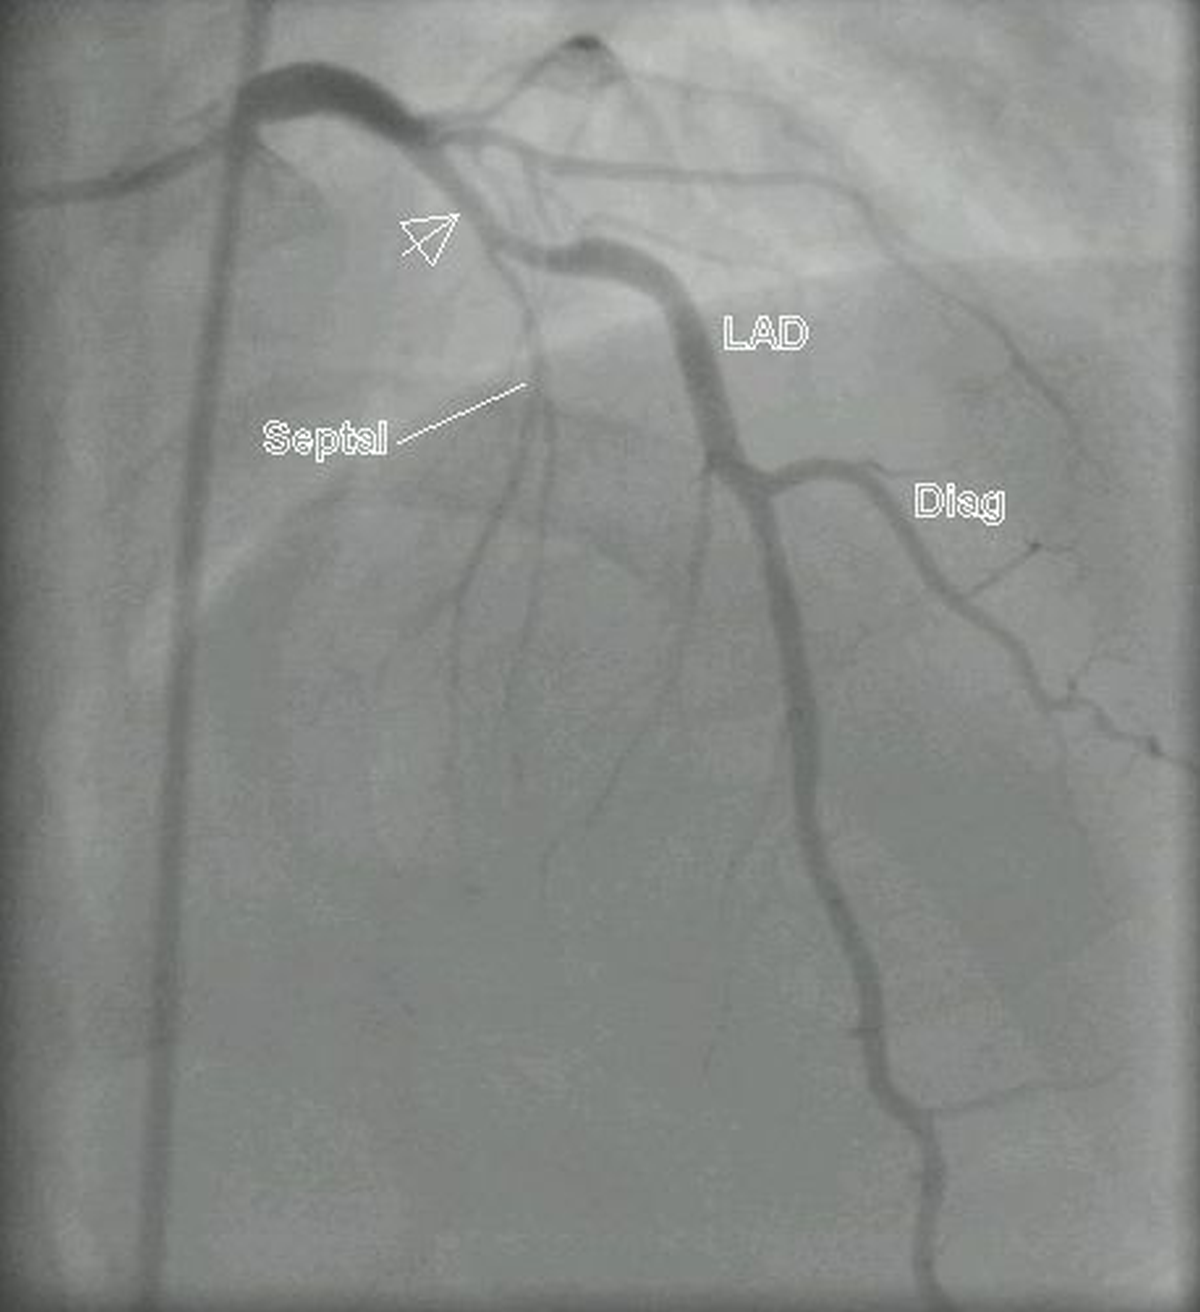 Left coronary angiogram in PA cranial view